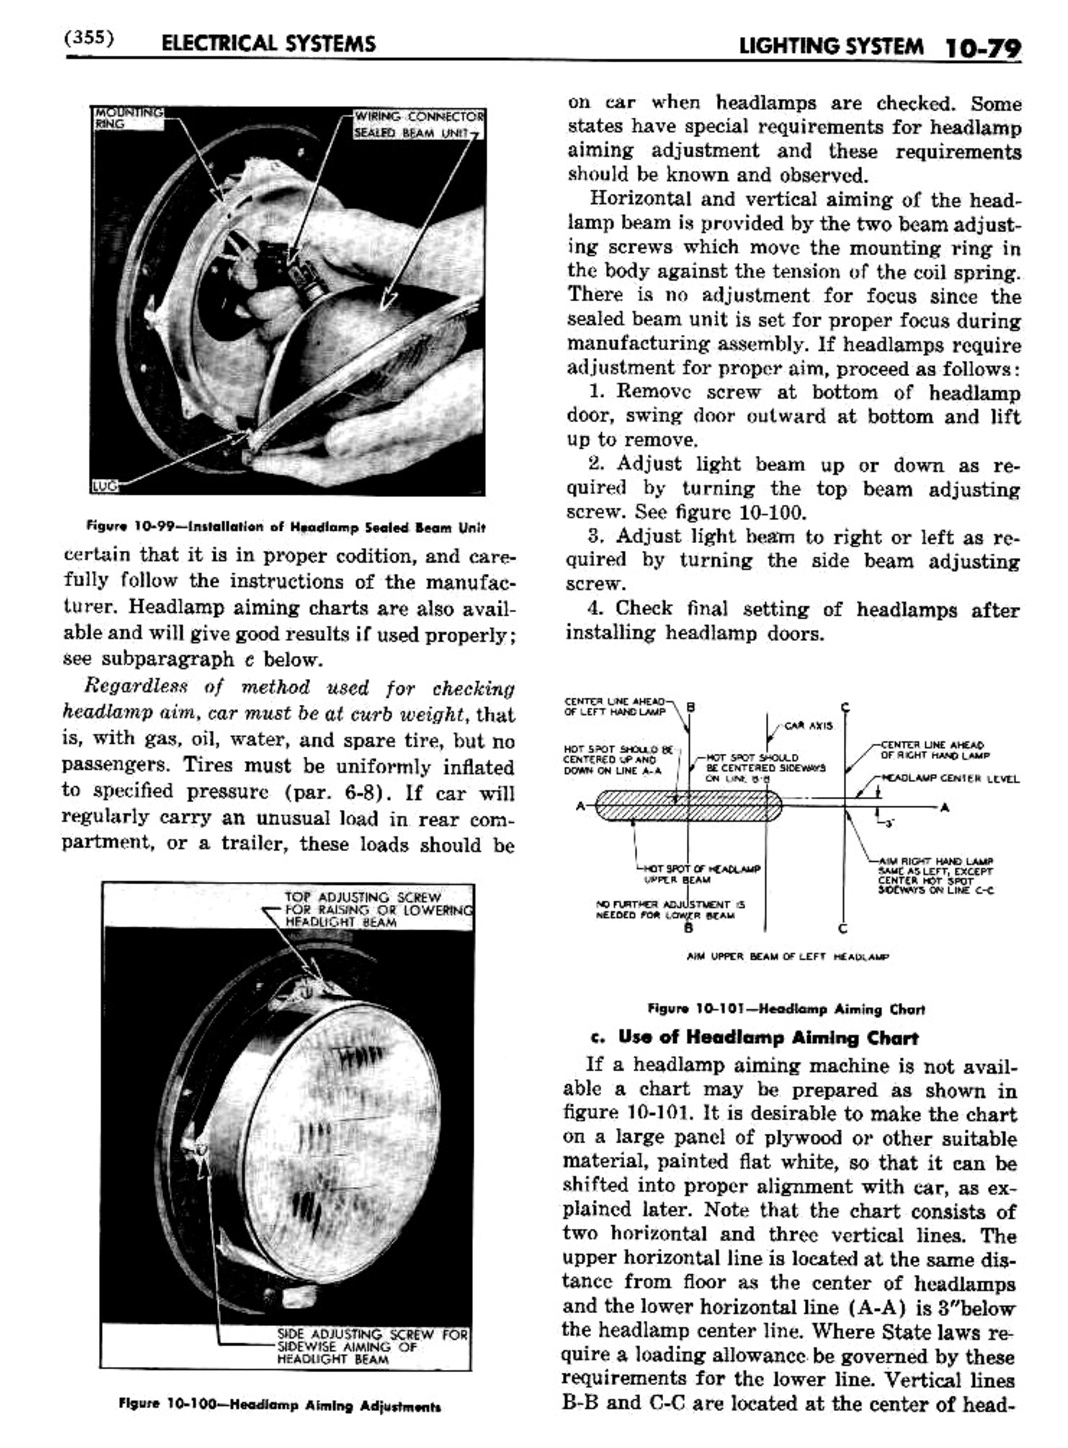 n_11 1948 Buick Shop Manual - Electrical Systems-079-079.jpg